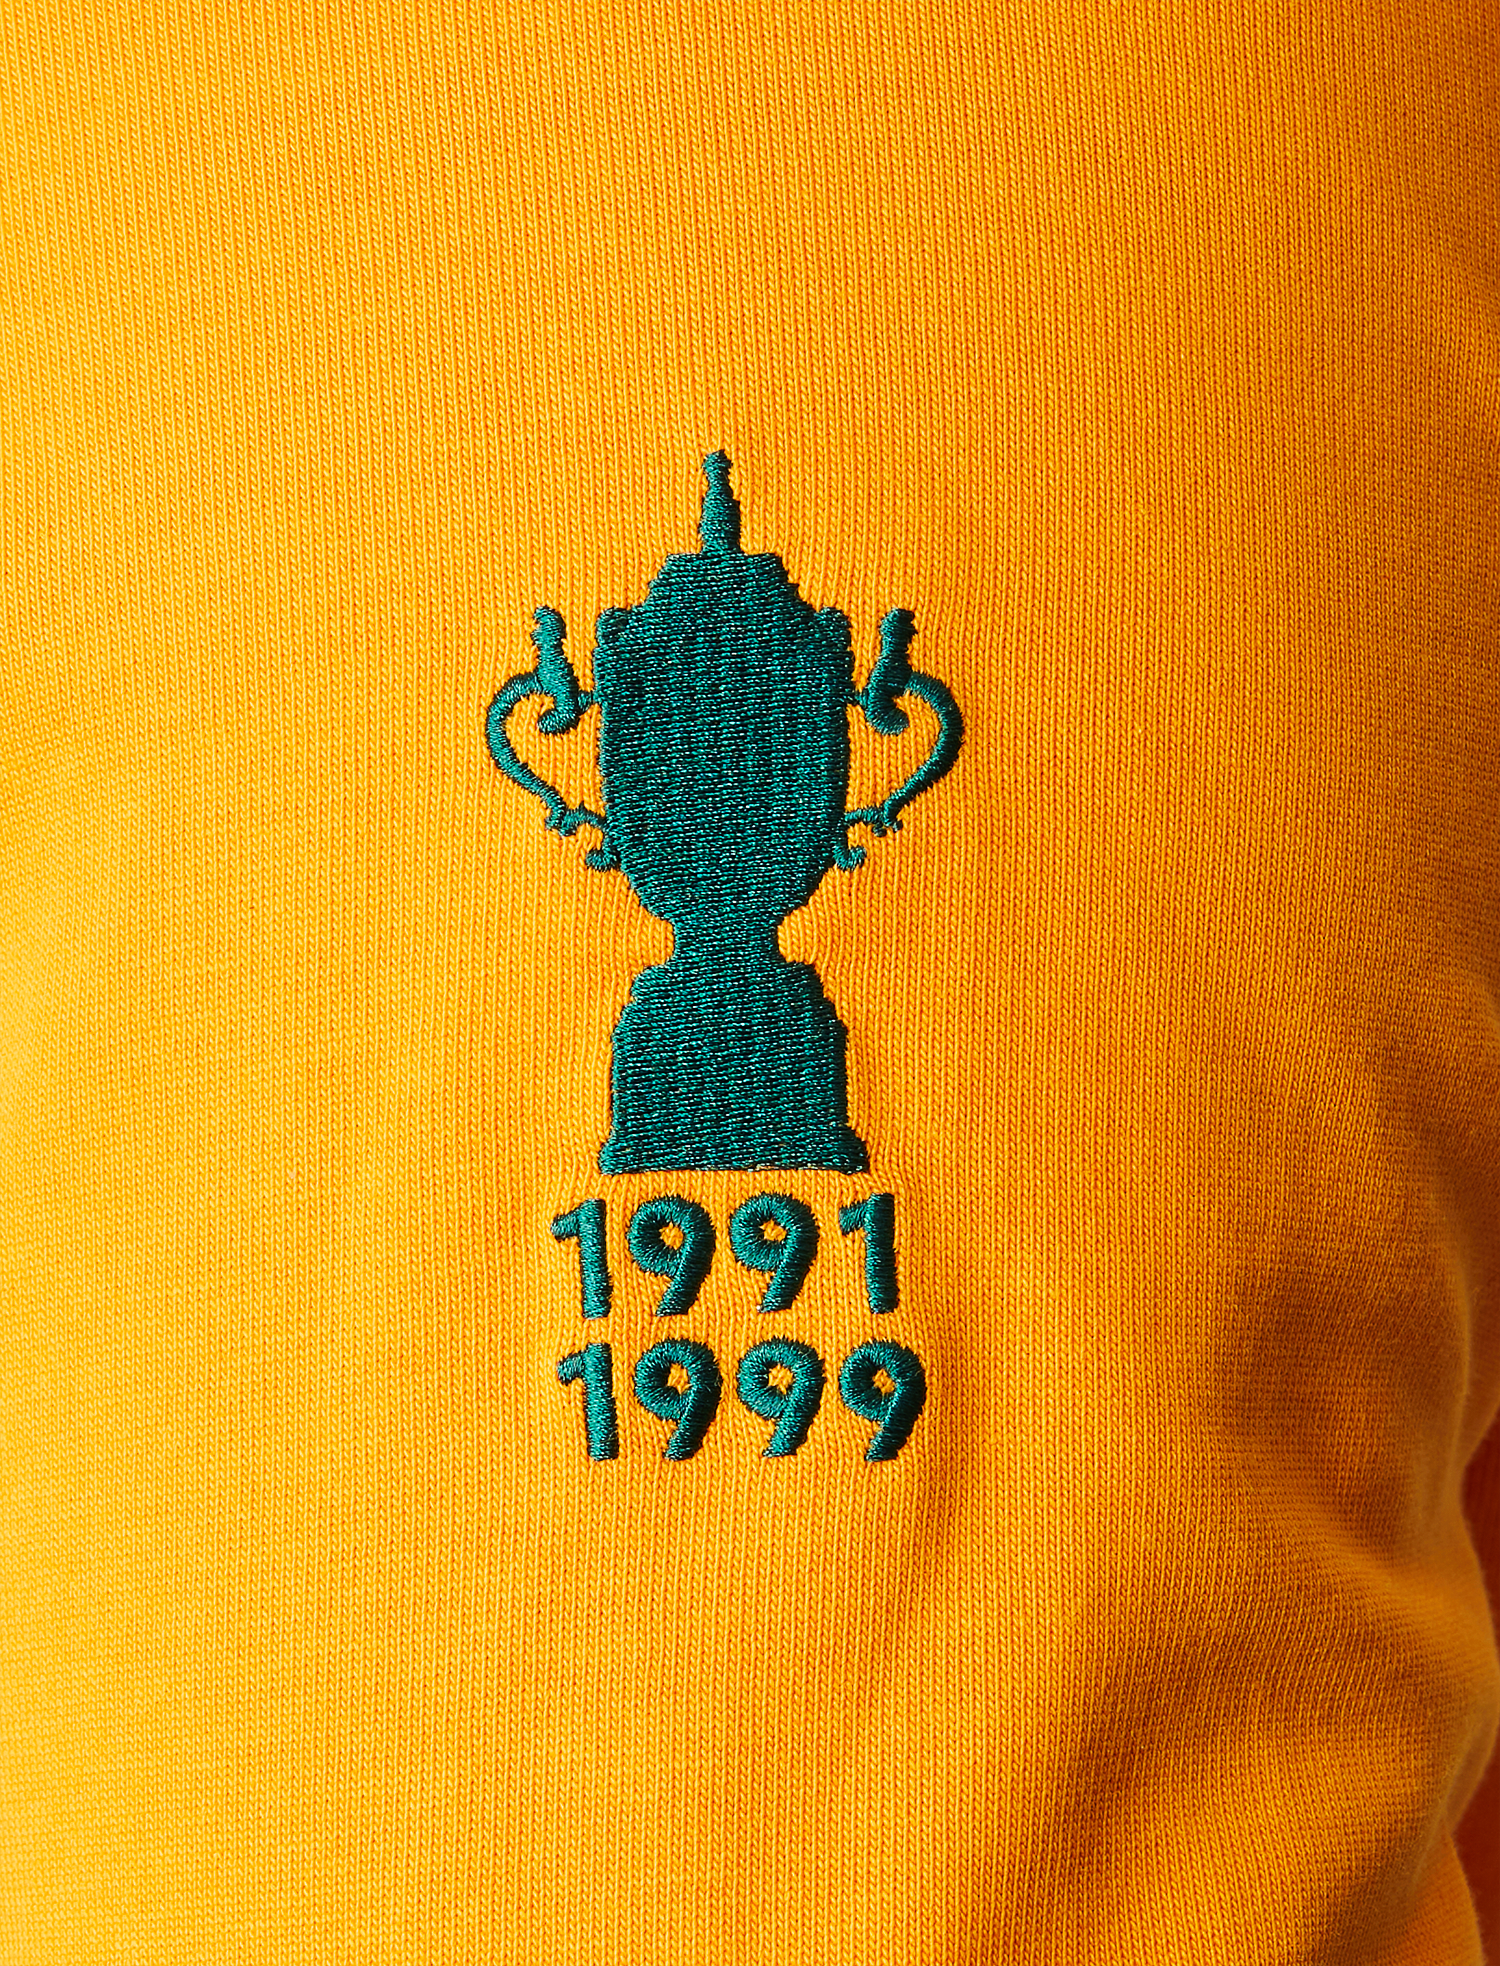 Wallabies RWC Traditional Jersey 2023 - The Rugby Shop Darwin